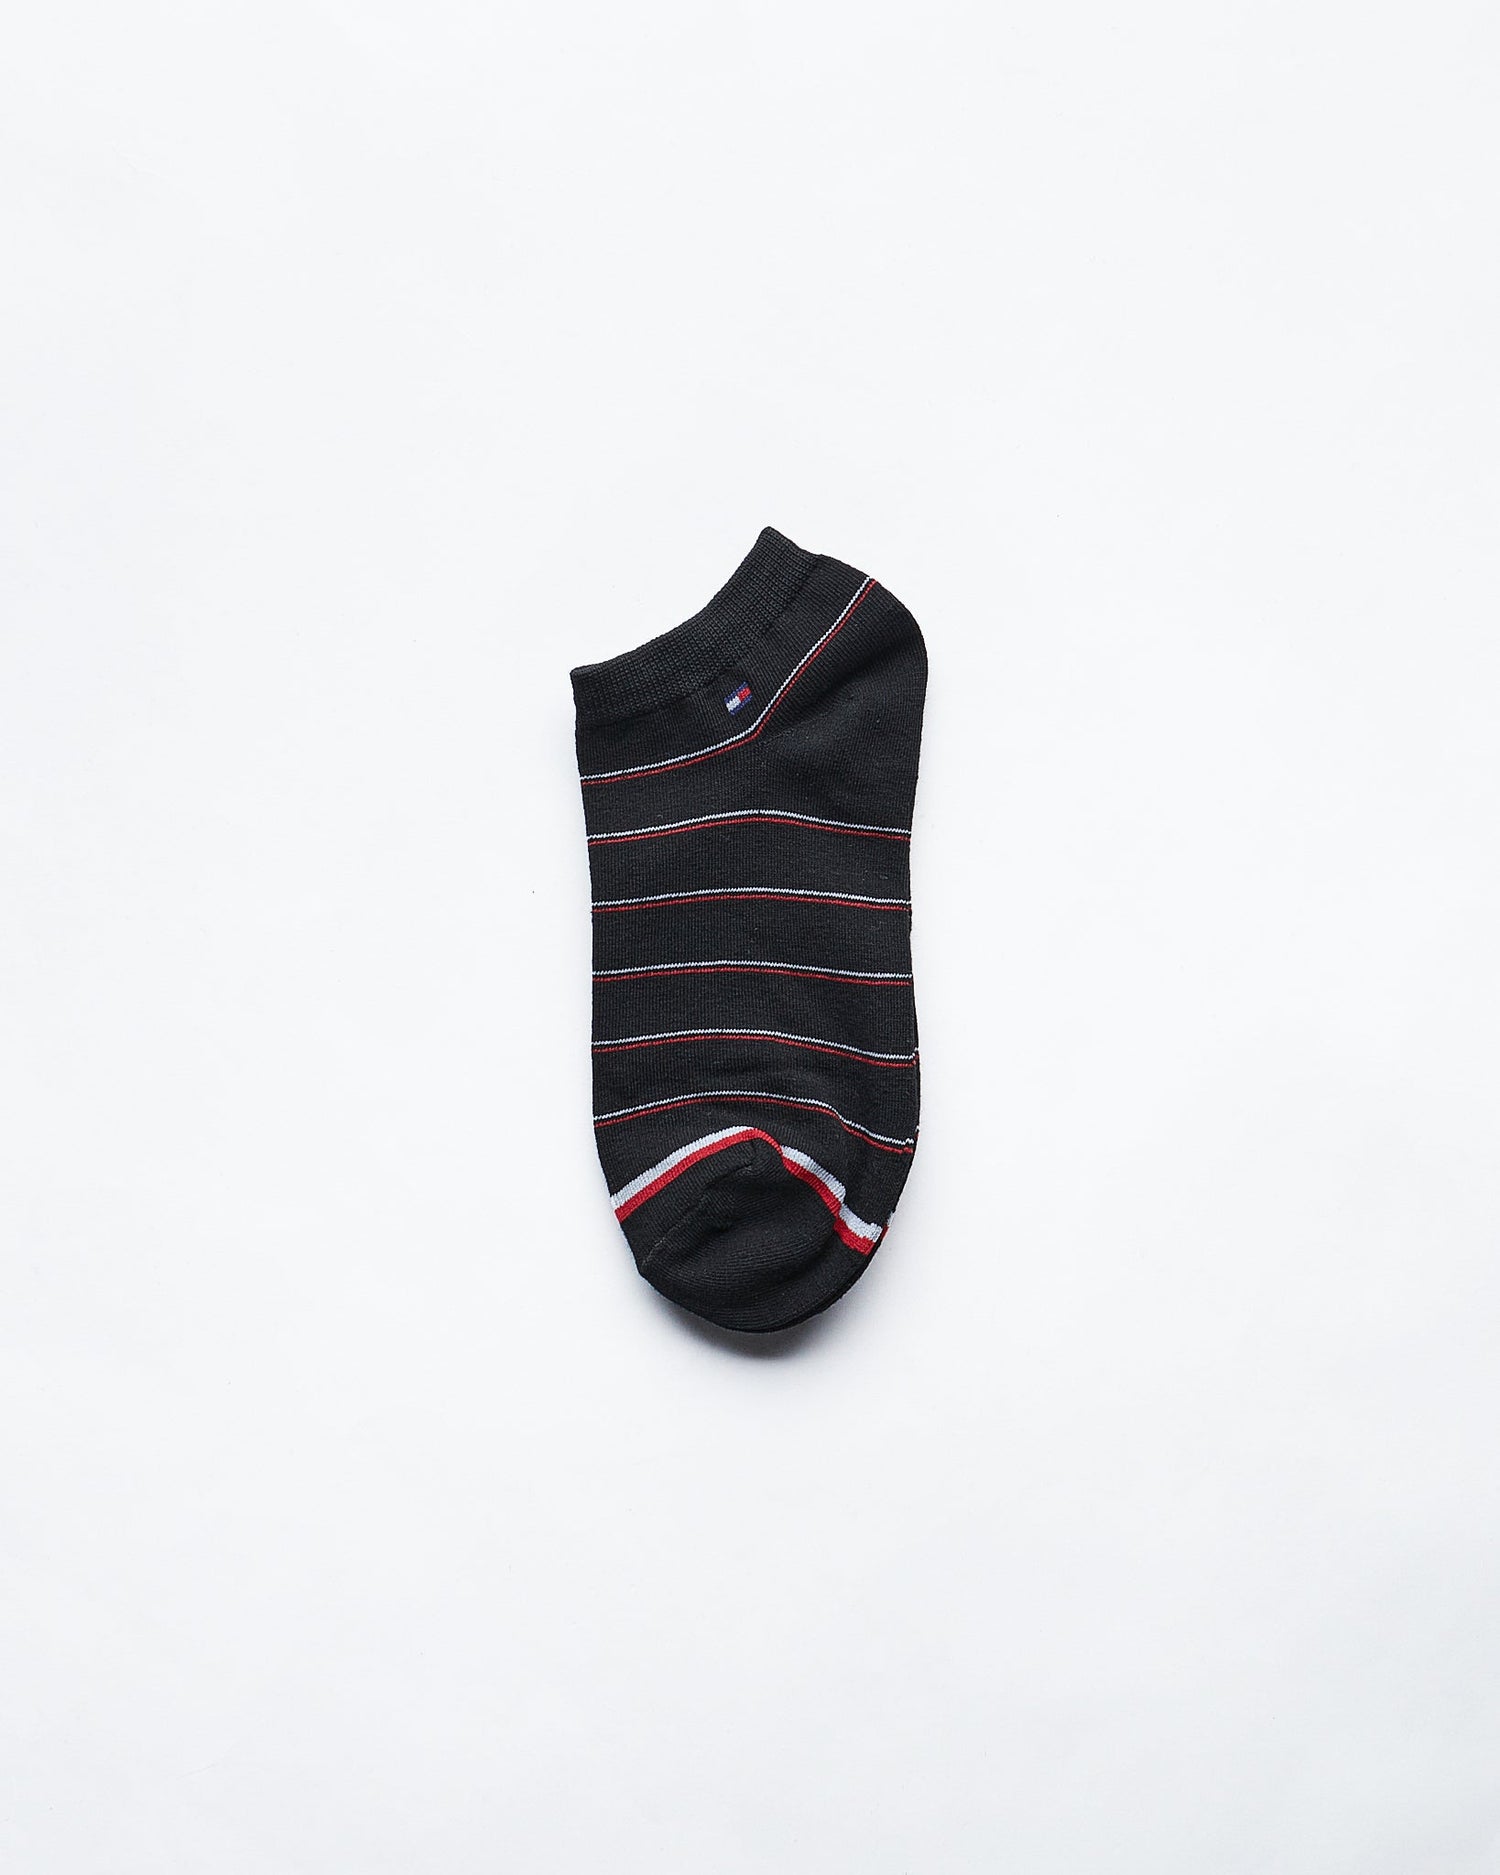 MOI OUTFIT-Striped Over Printed Low Cut 3 Pairs Socks 7.90